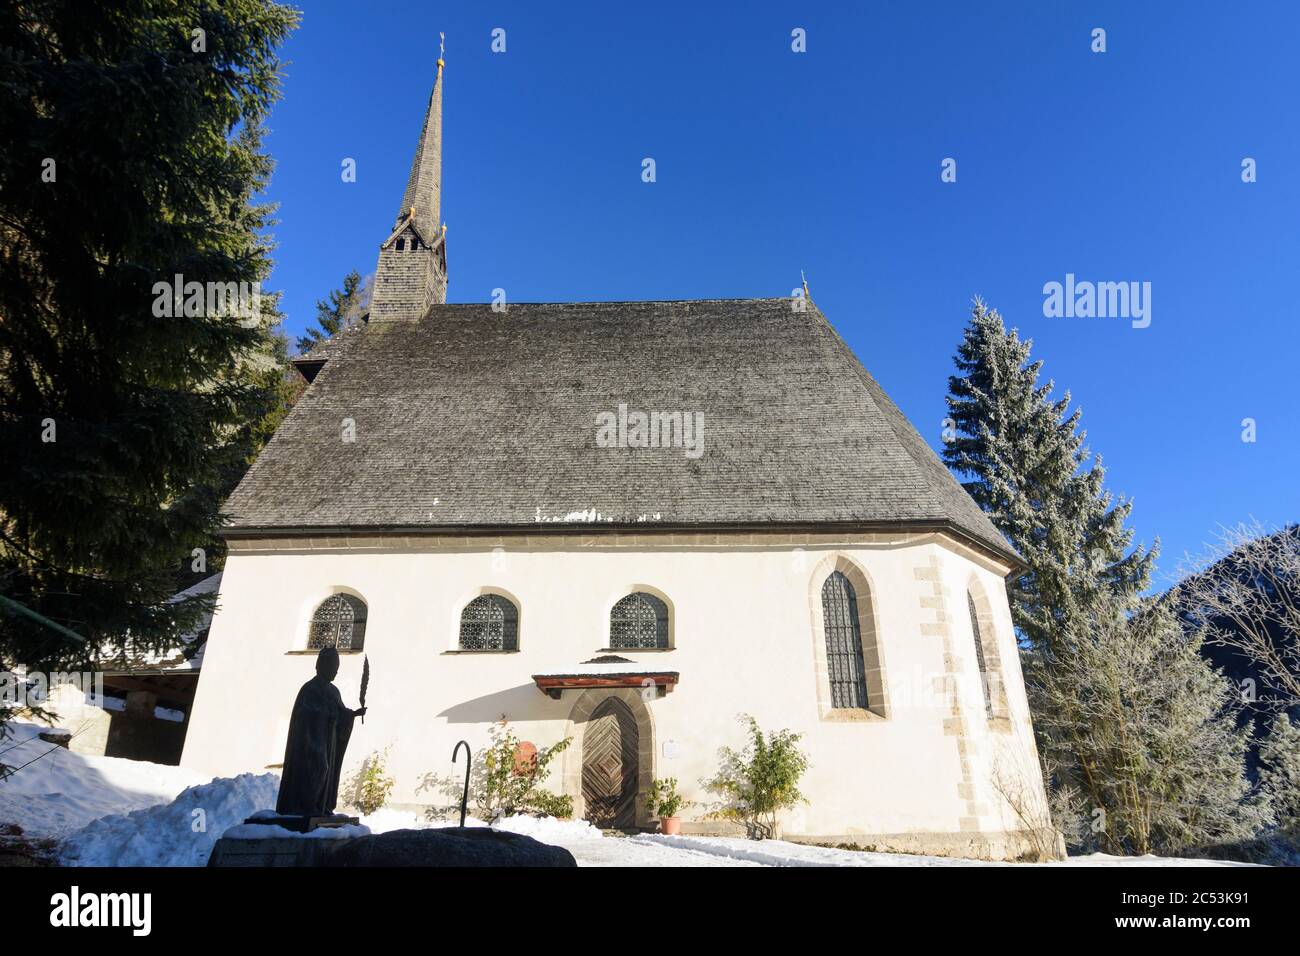 St. Ulrich am Pillersee, branch church, pilgrimage church St. Adolari in the Kitzbühel Alps, Pillersee Tal (Pillersee valley), Tyrol, Austria Stock Photo